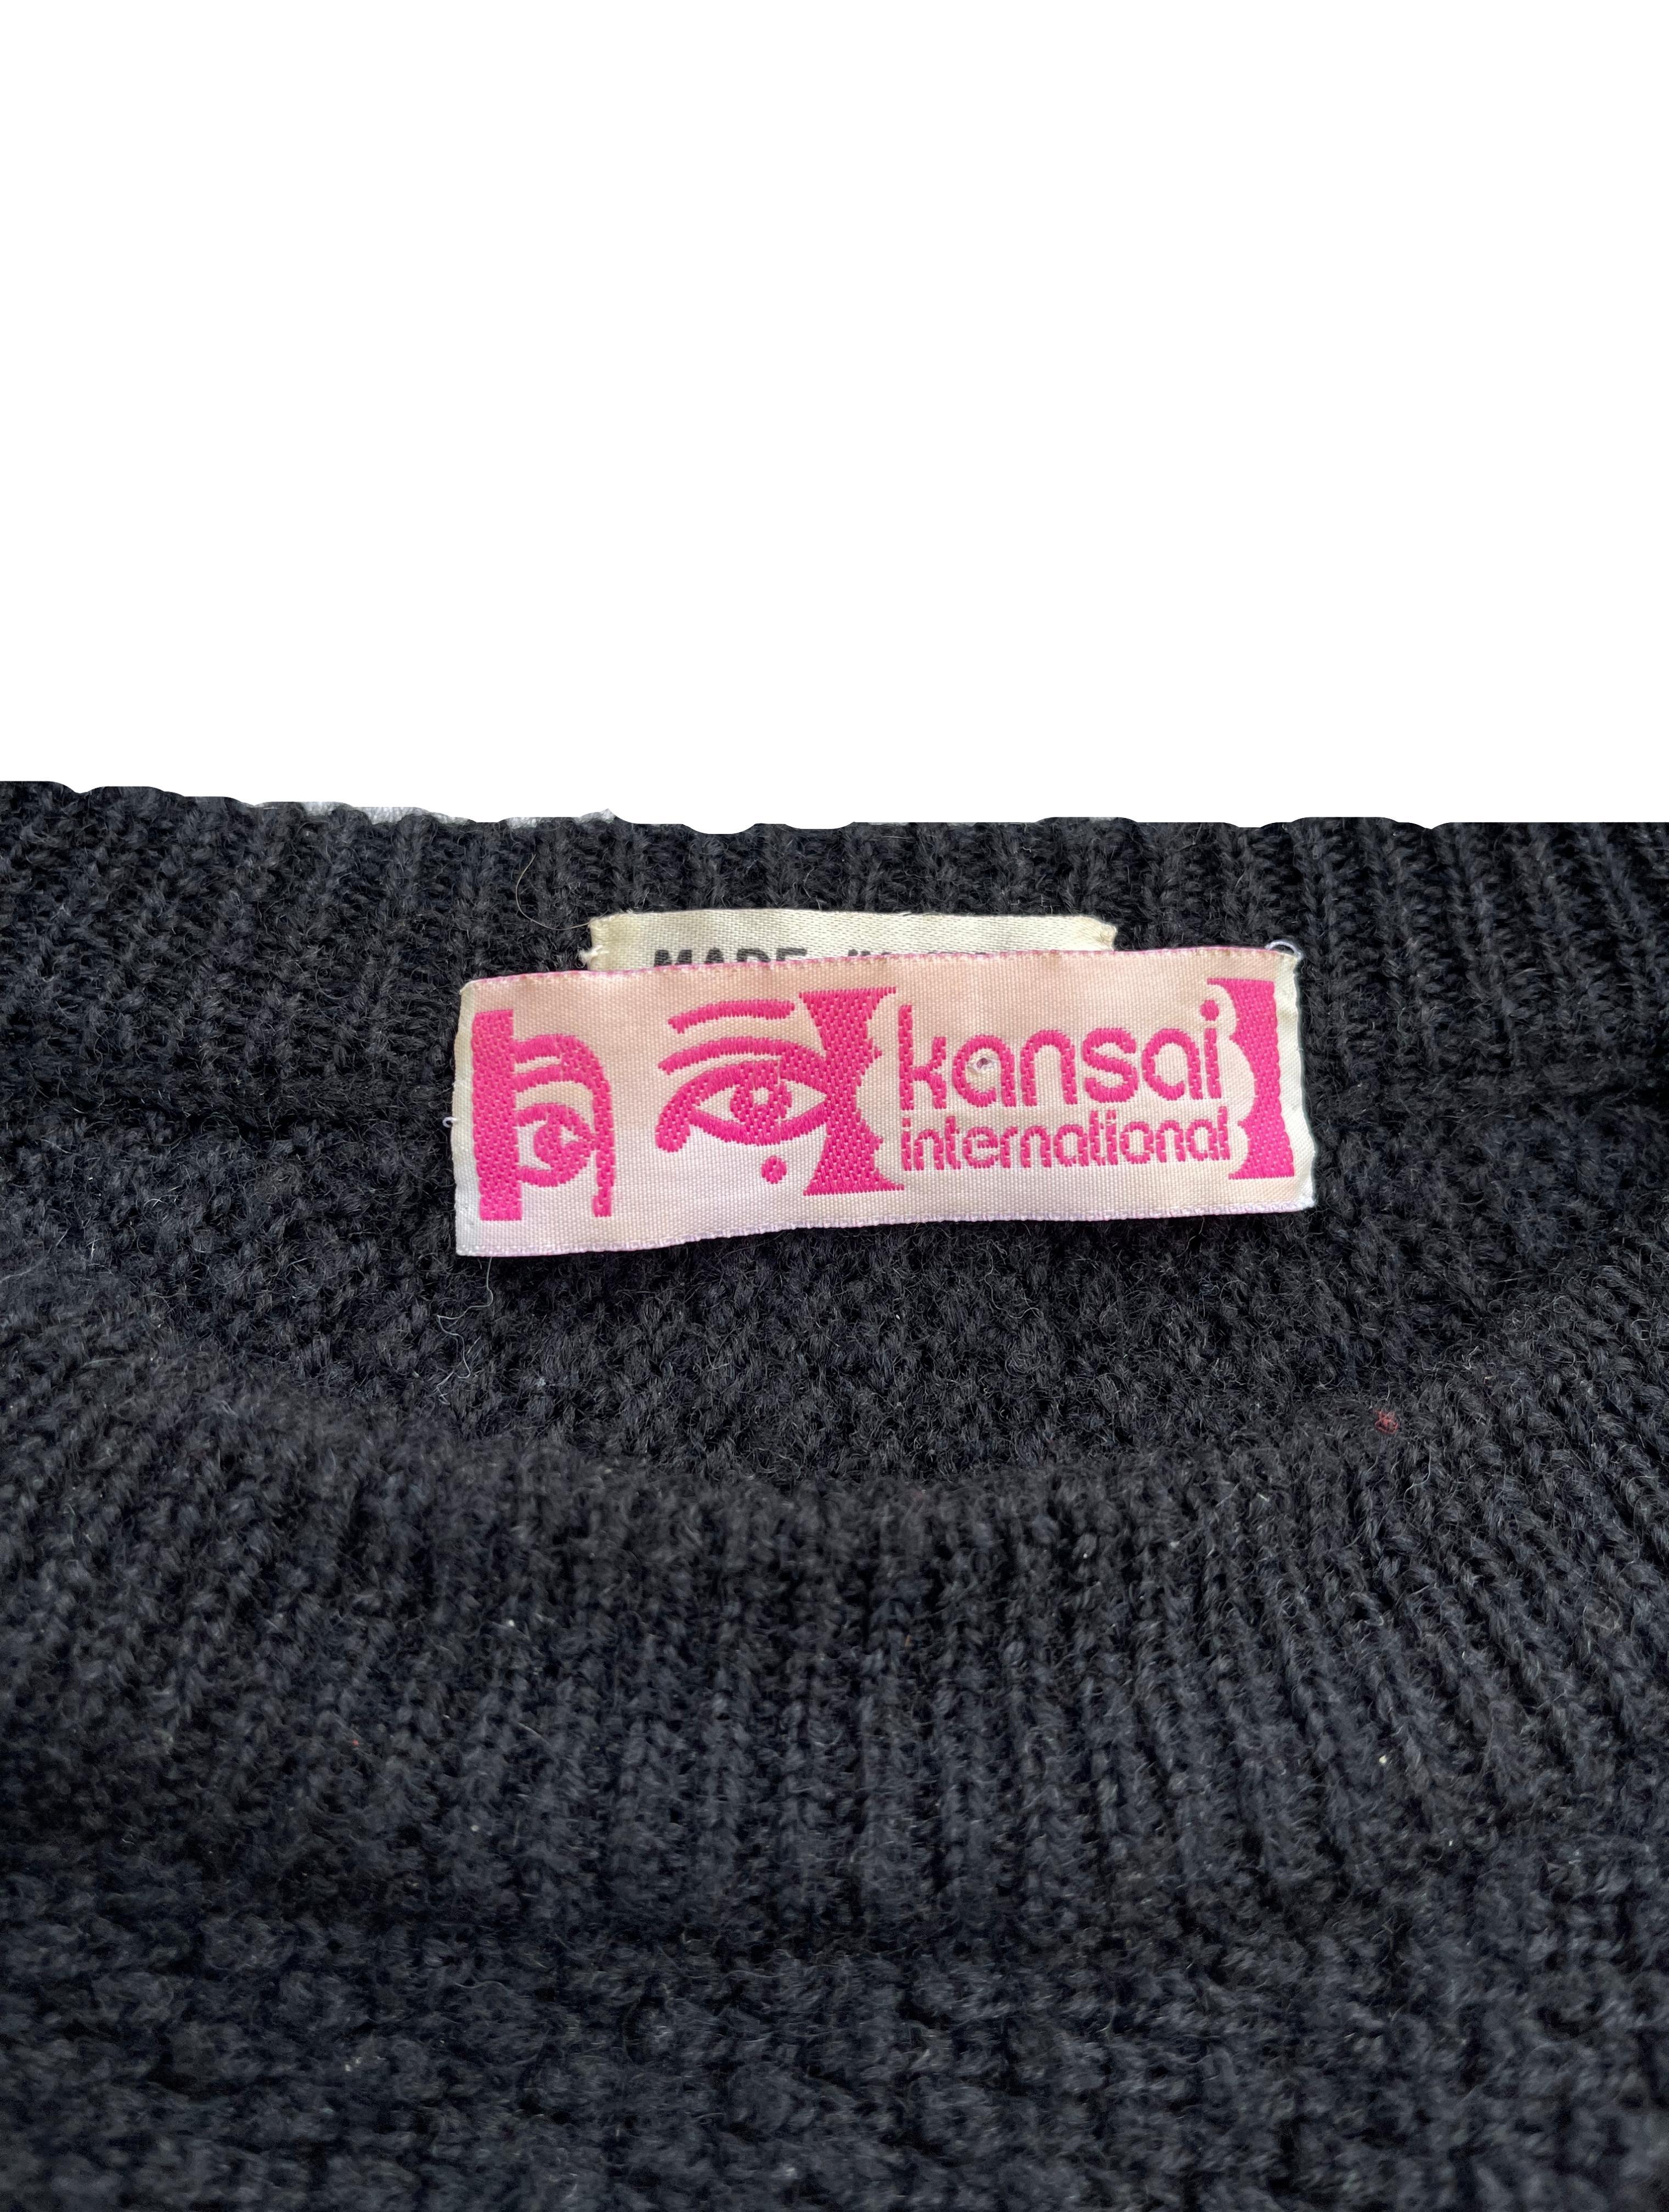 Early 1990's Kansai Yamamoto, few final years of Kansai fruitful and most influential era.

The tag Kansai International was part of his project to discover new elements from different cultures and imposed these elements onto his clothes.

Size on